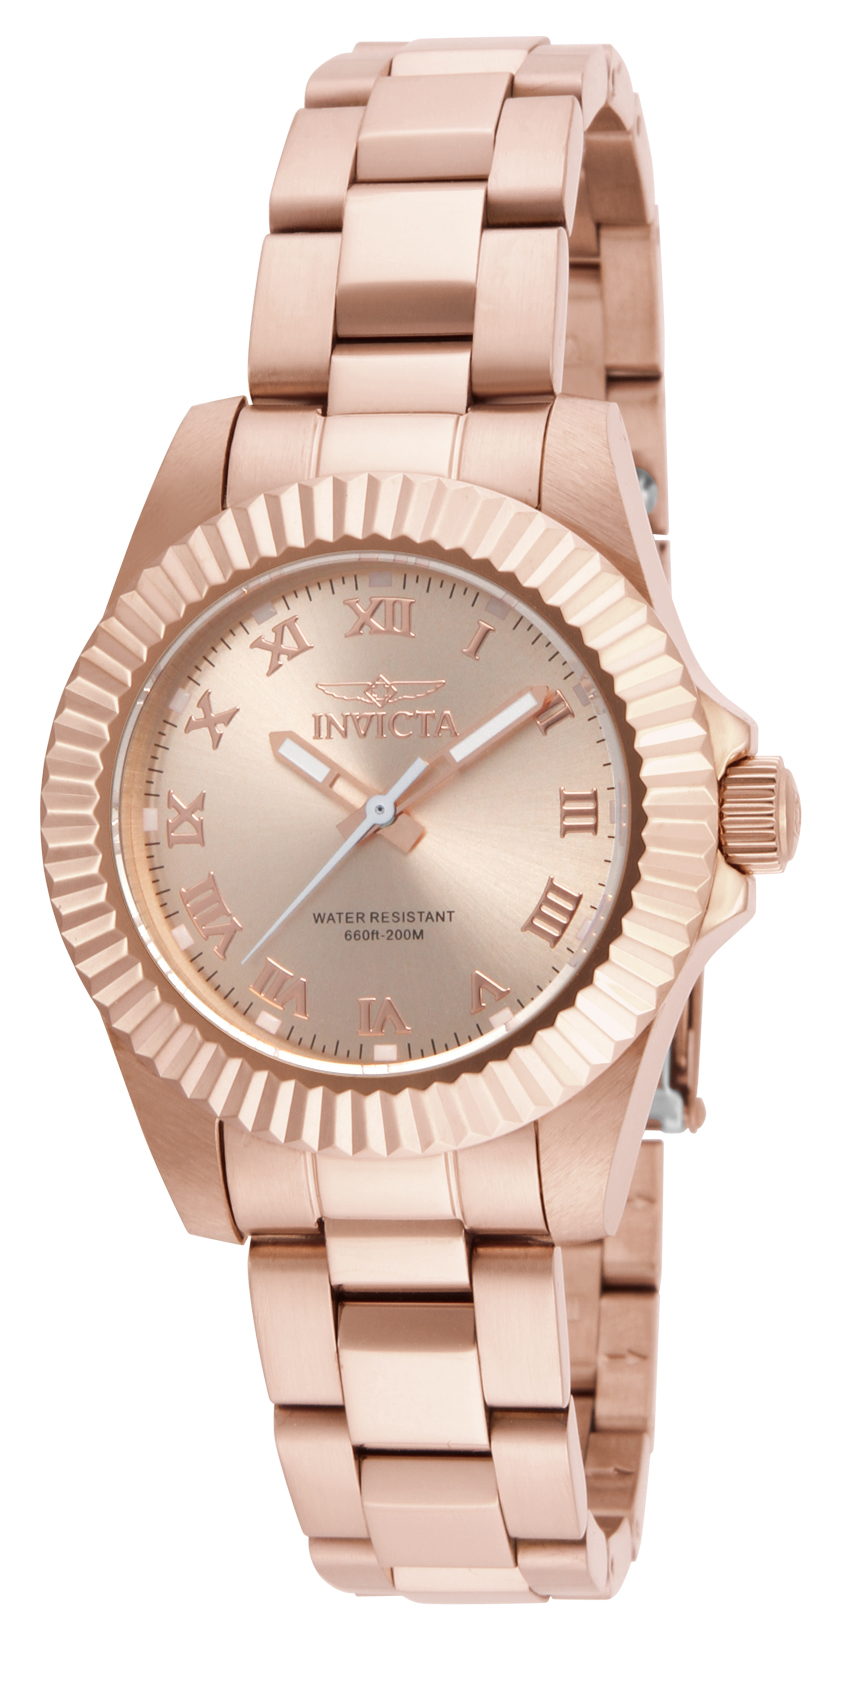 Invicta Pro Diver Women's Watch - 34mm, Rose Gold (16763)